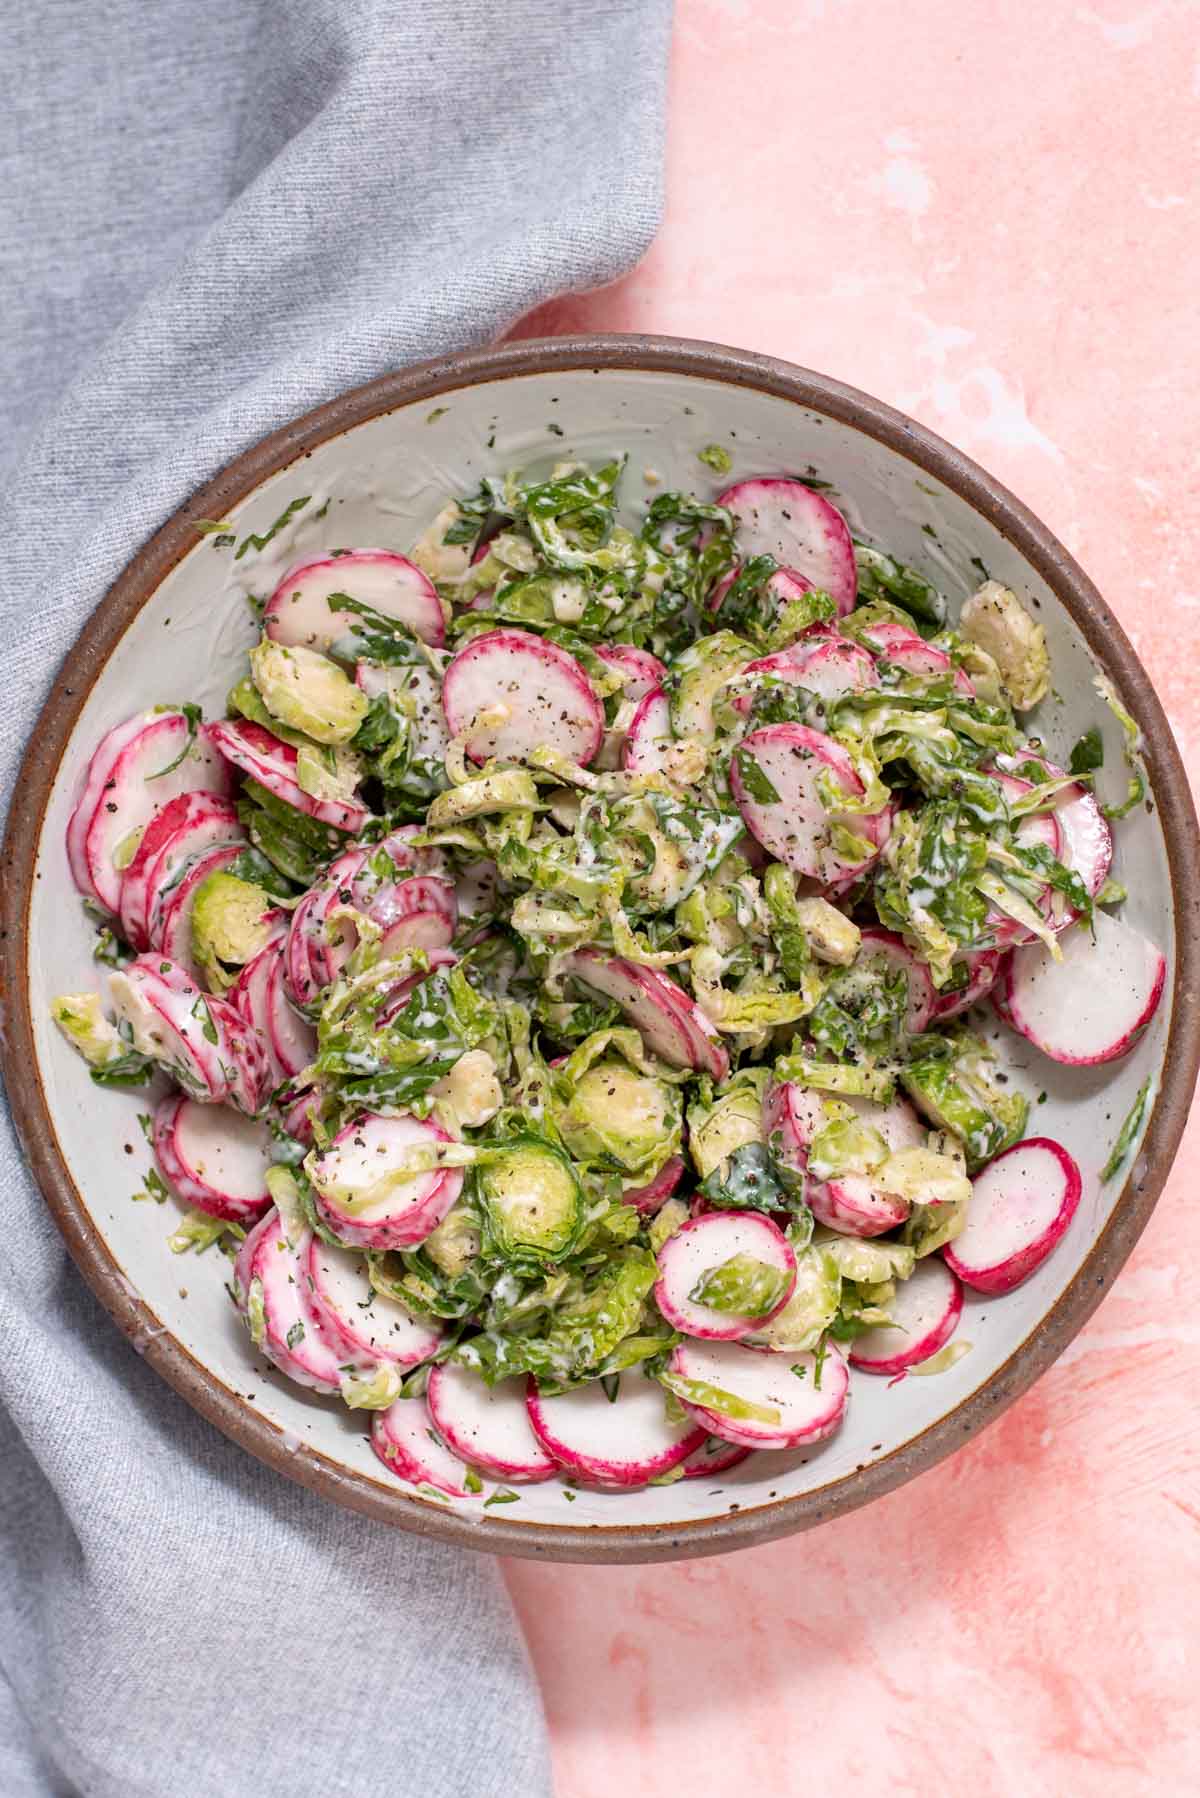 Sliced radishes and brussel sprout slaw in a white speckled bowl on a pink background